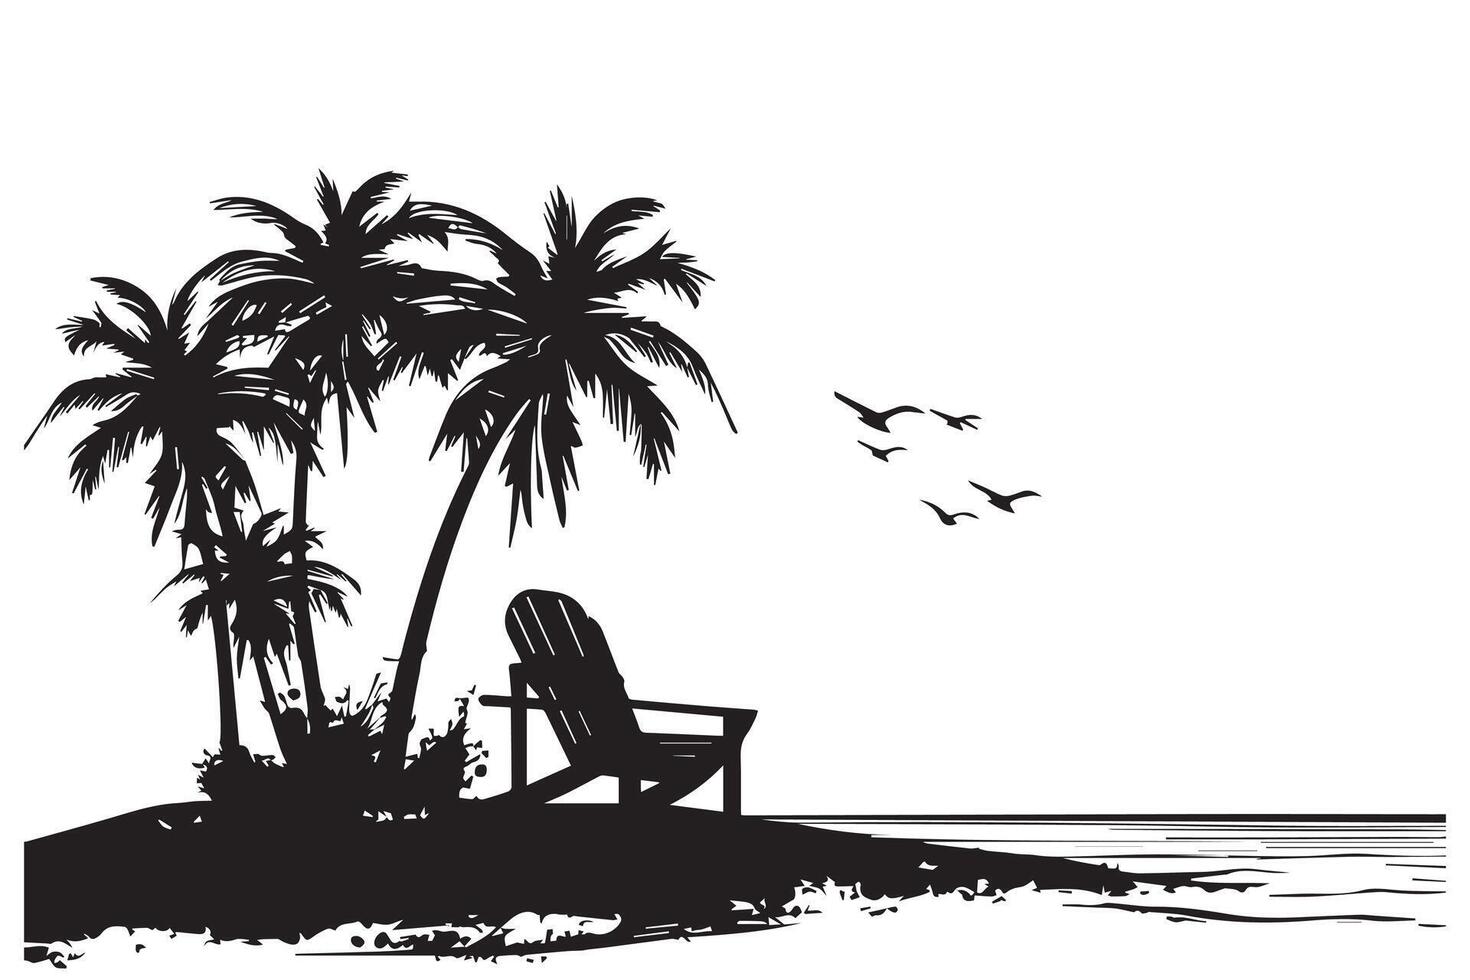 summer Scene With A Beach Chair With small Palm Trees, and sunbird Beach Time, Summer Vacation black silhouette white background vector